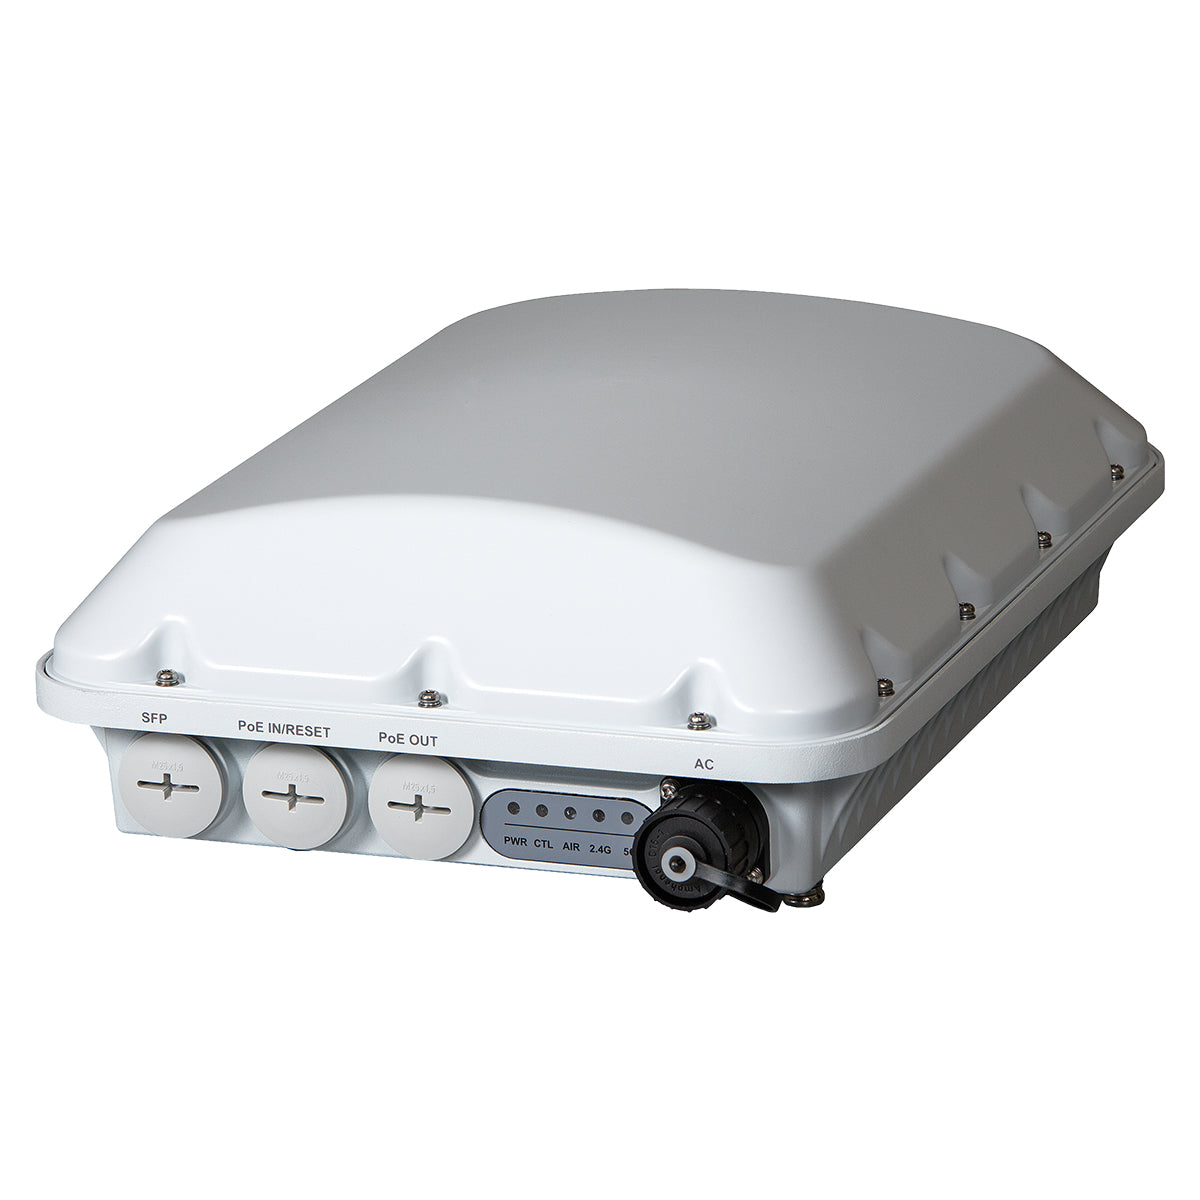 901-T710-WW01 - RUCKUS WIRELESS - T710 WLAN access point 1733 Mbit/s Power over Ethernet (PoE) White